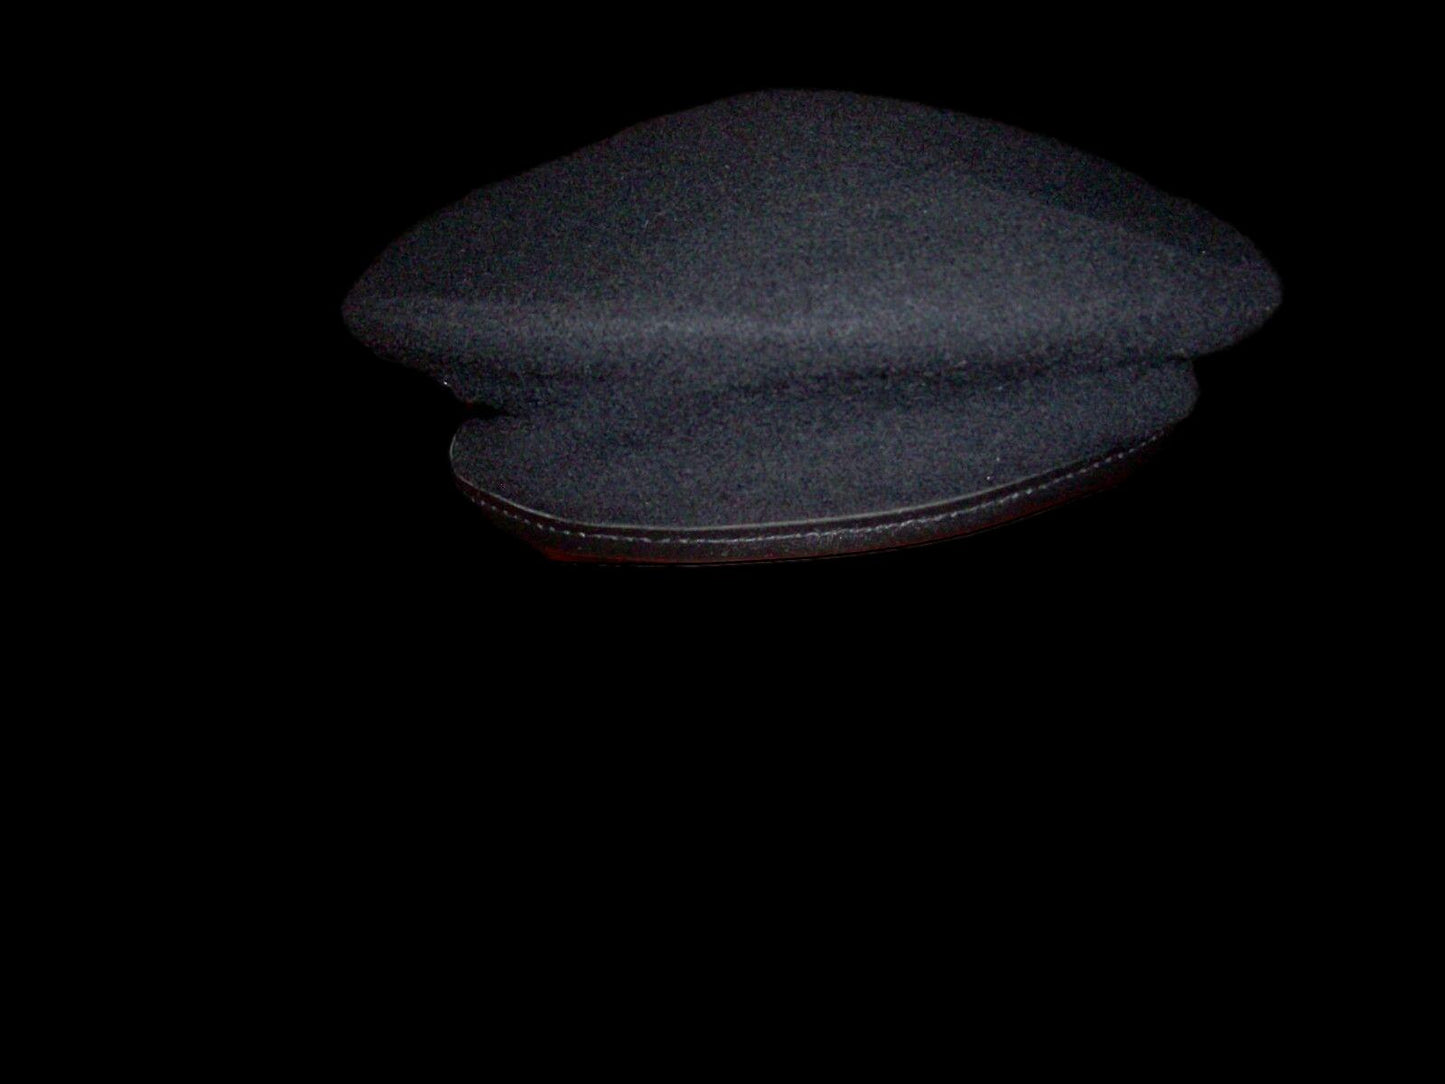 U.S MILITARY ISSUE BLACK WOOL BERET MADE IN THE U.S.A BY BANCROFT SIZE 7 3/4 XL